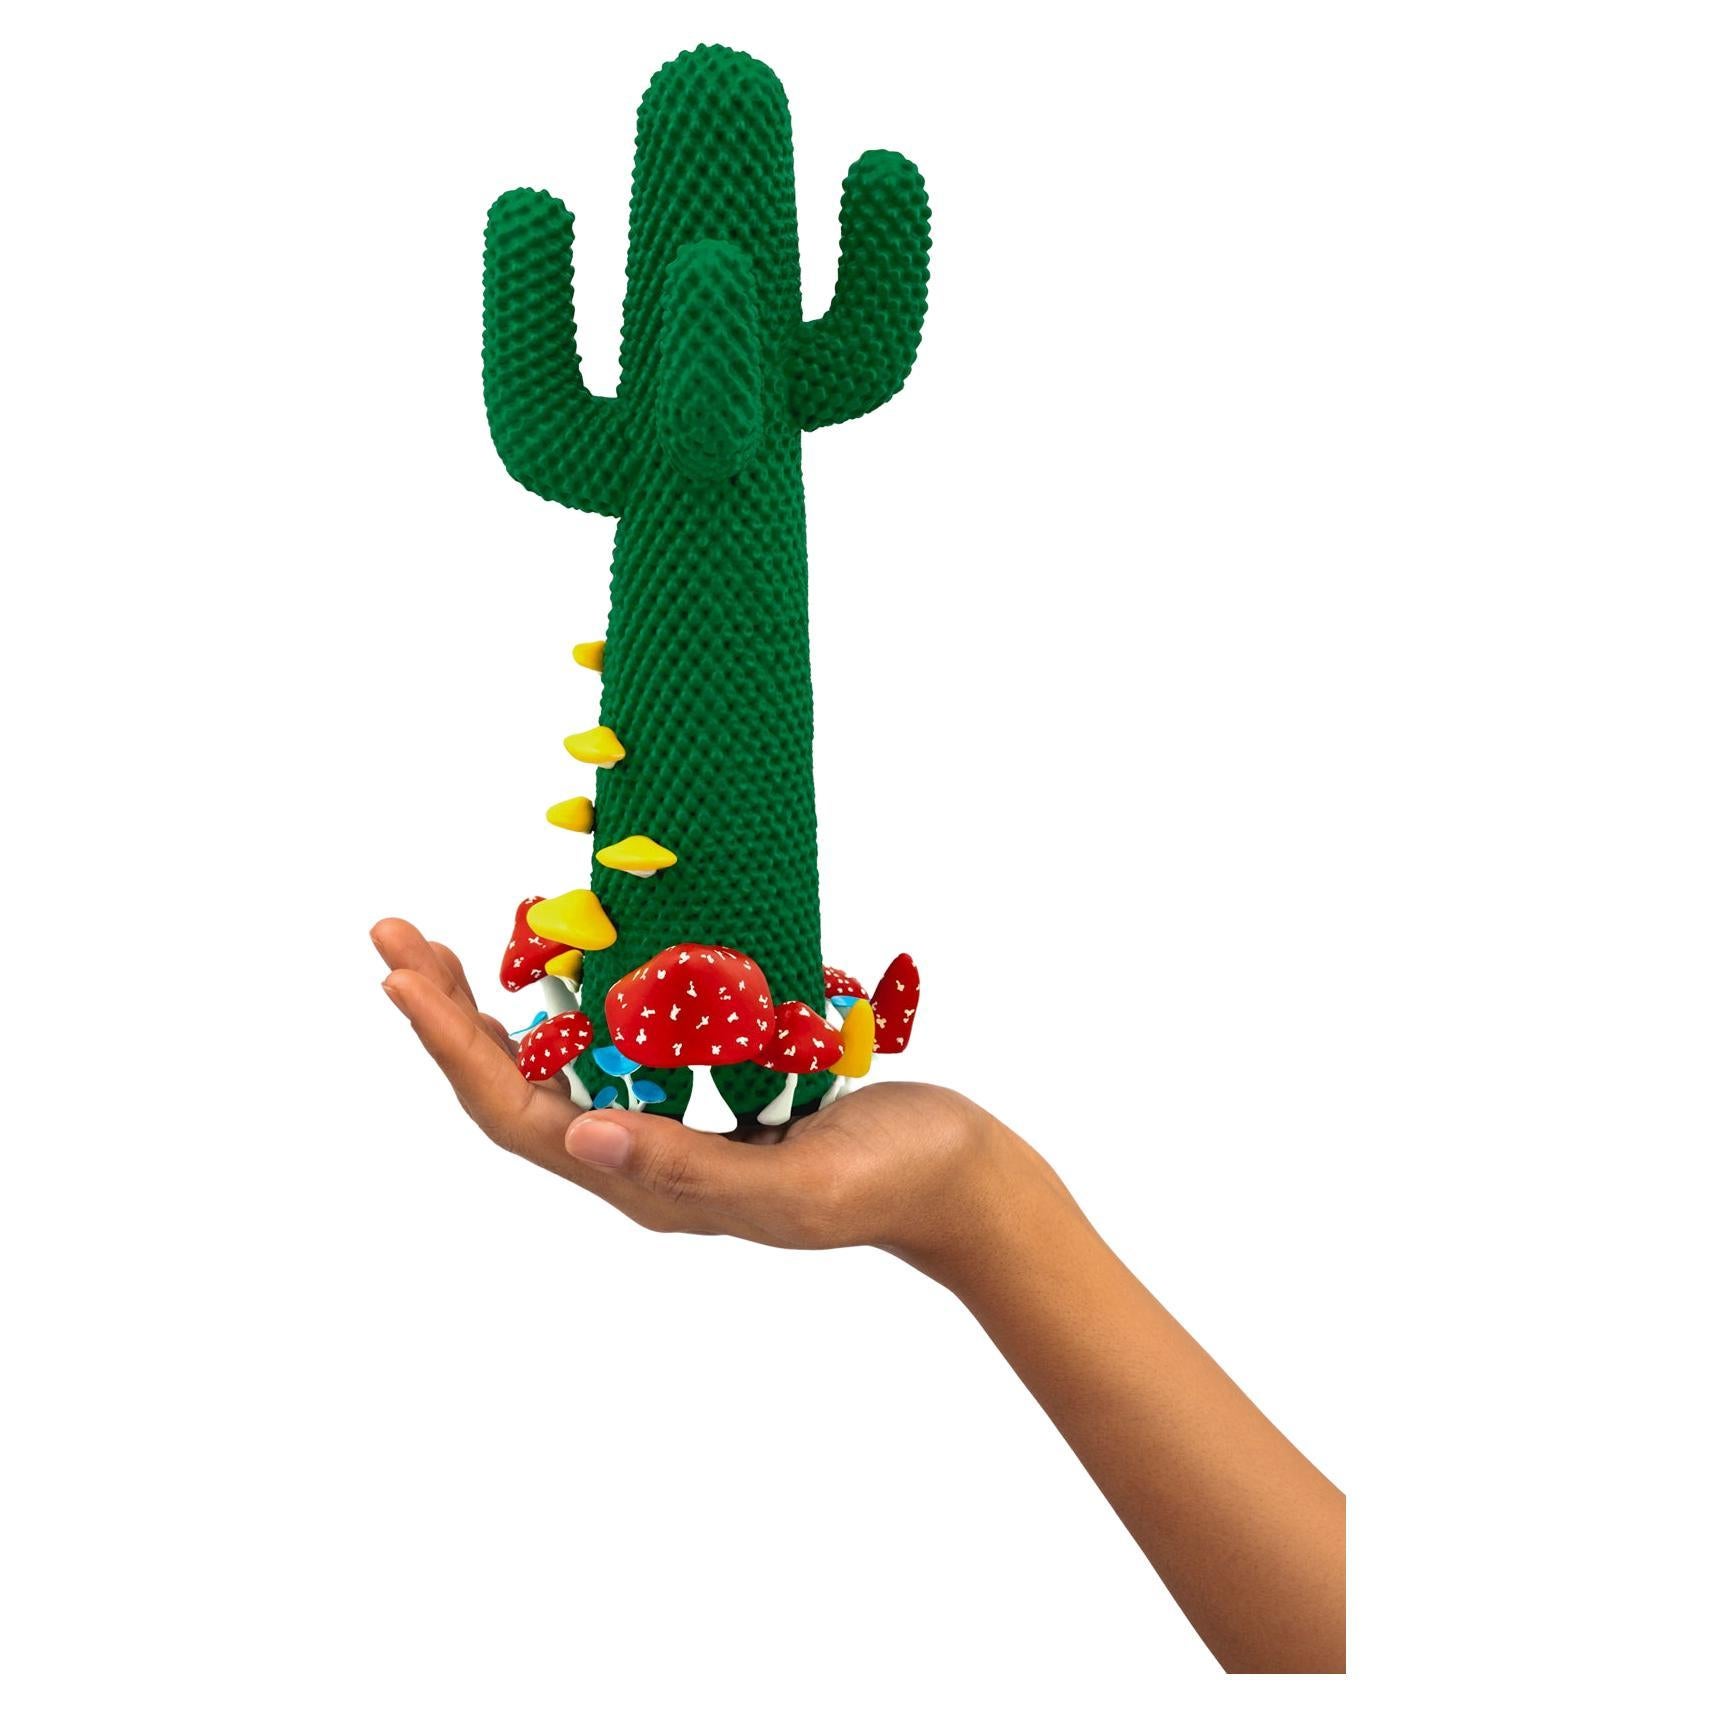 Limited Edition #64/99

Gufram presents the miniaturised version of the Shroom CACTUS® created in collaboration with A$AP Rocky and the artist’s new design studio HOMMEMADE Exactly as the real-size Shroom CACTUS®, the new Guframini piece features